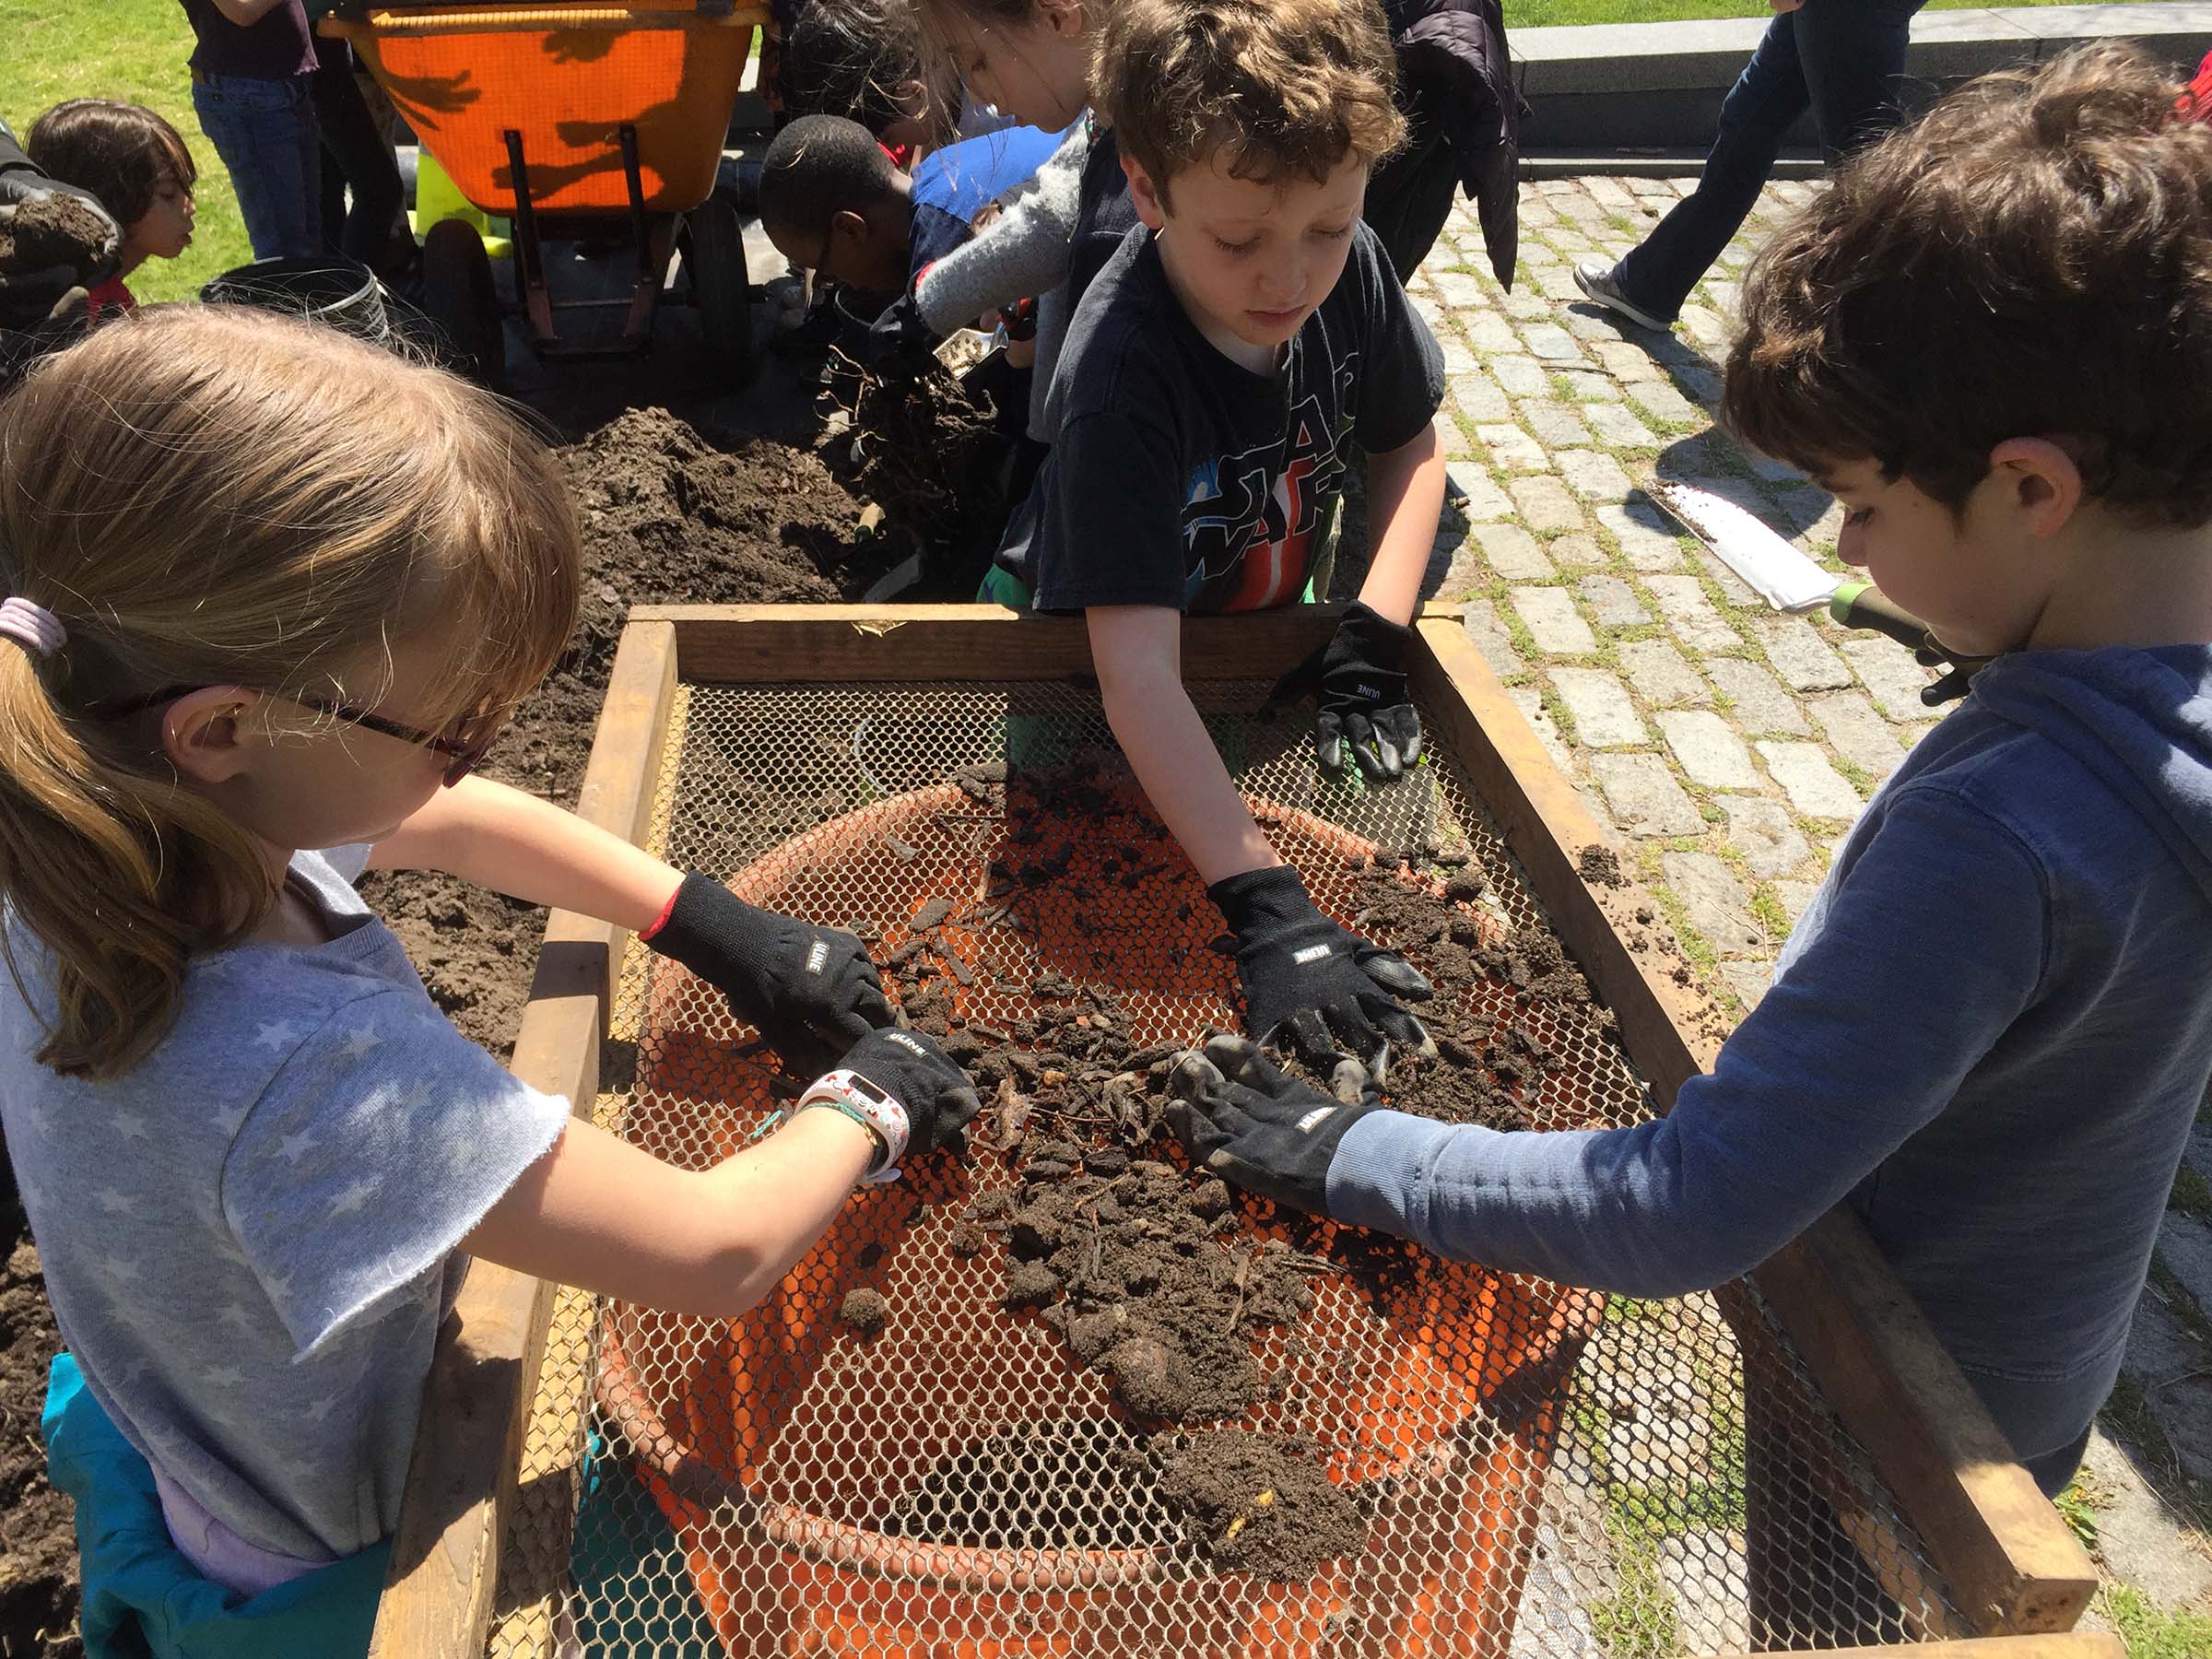 Students looking through the dirt found in the soil at Hudson River Park